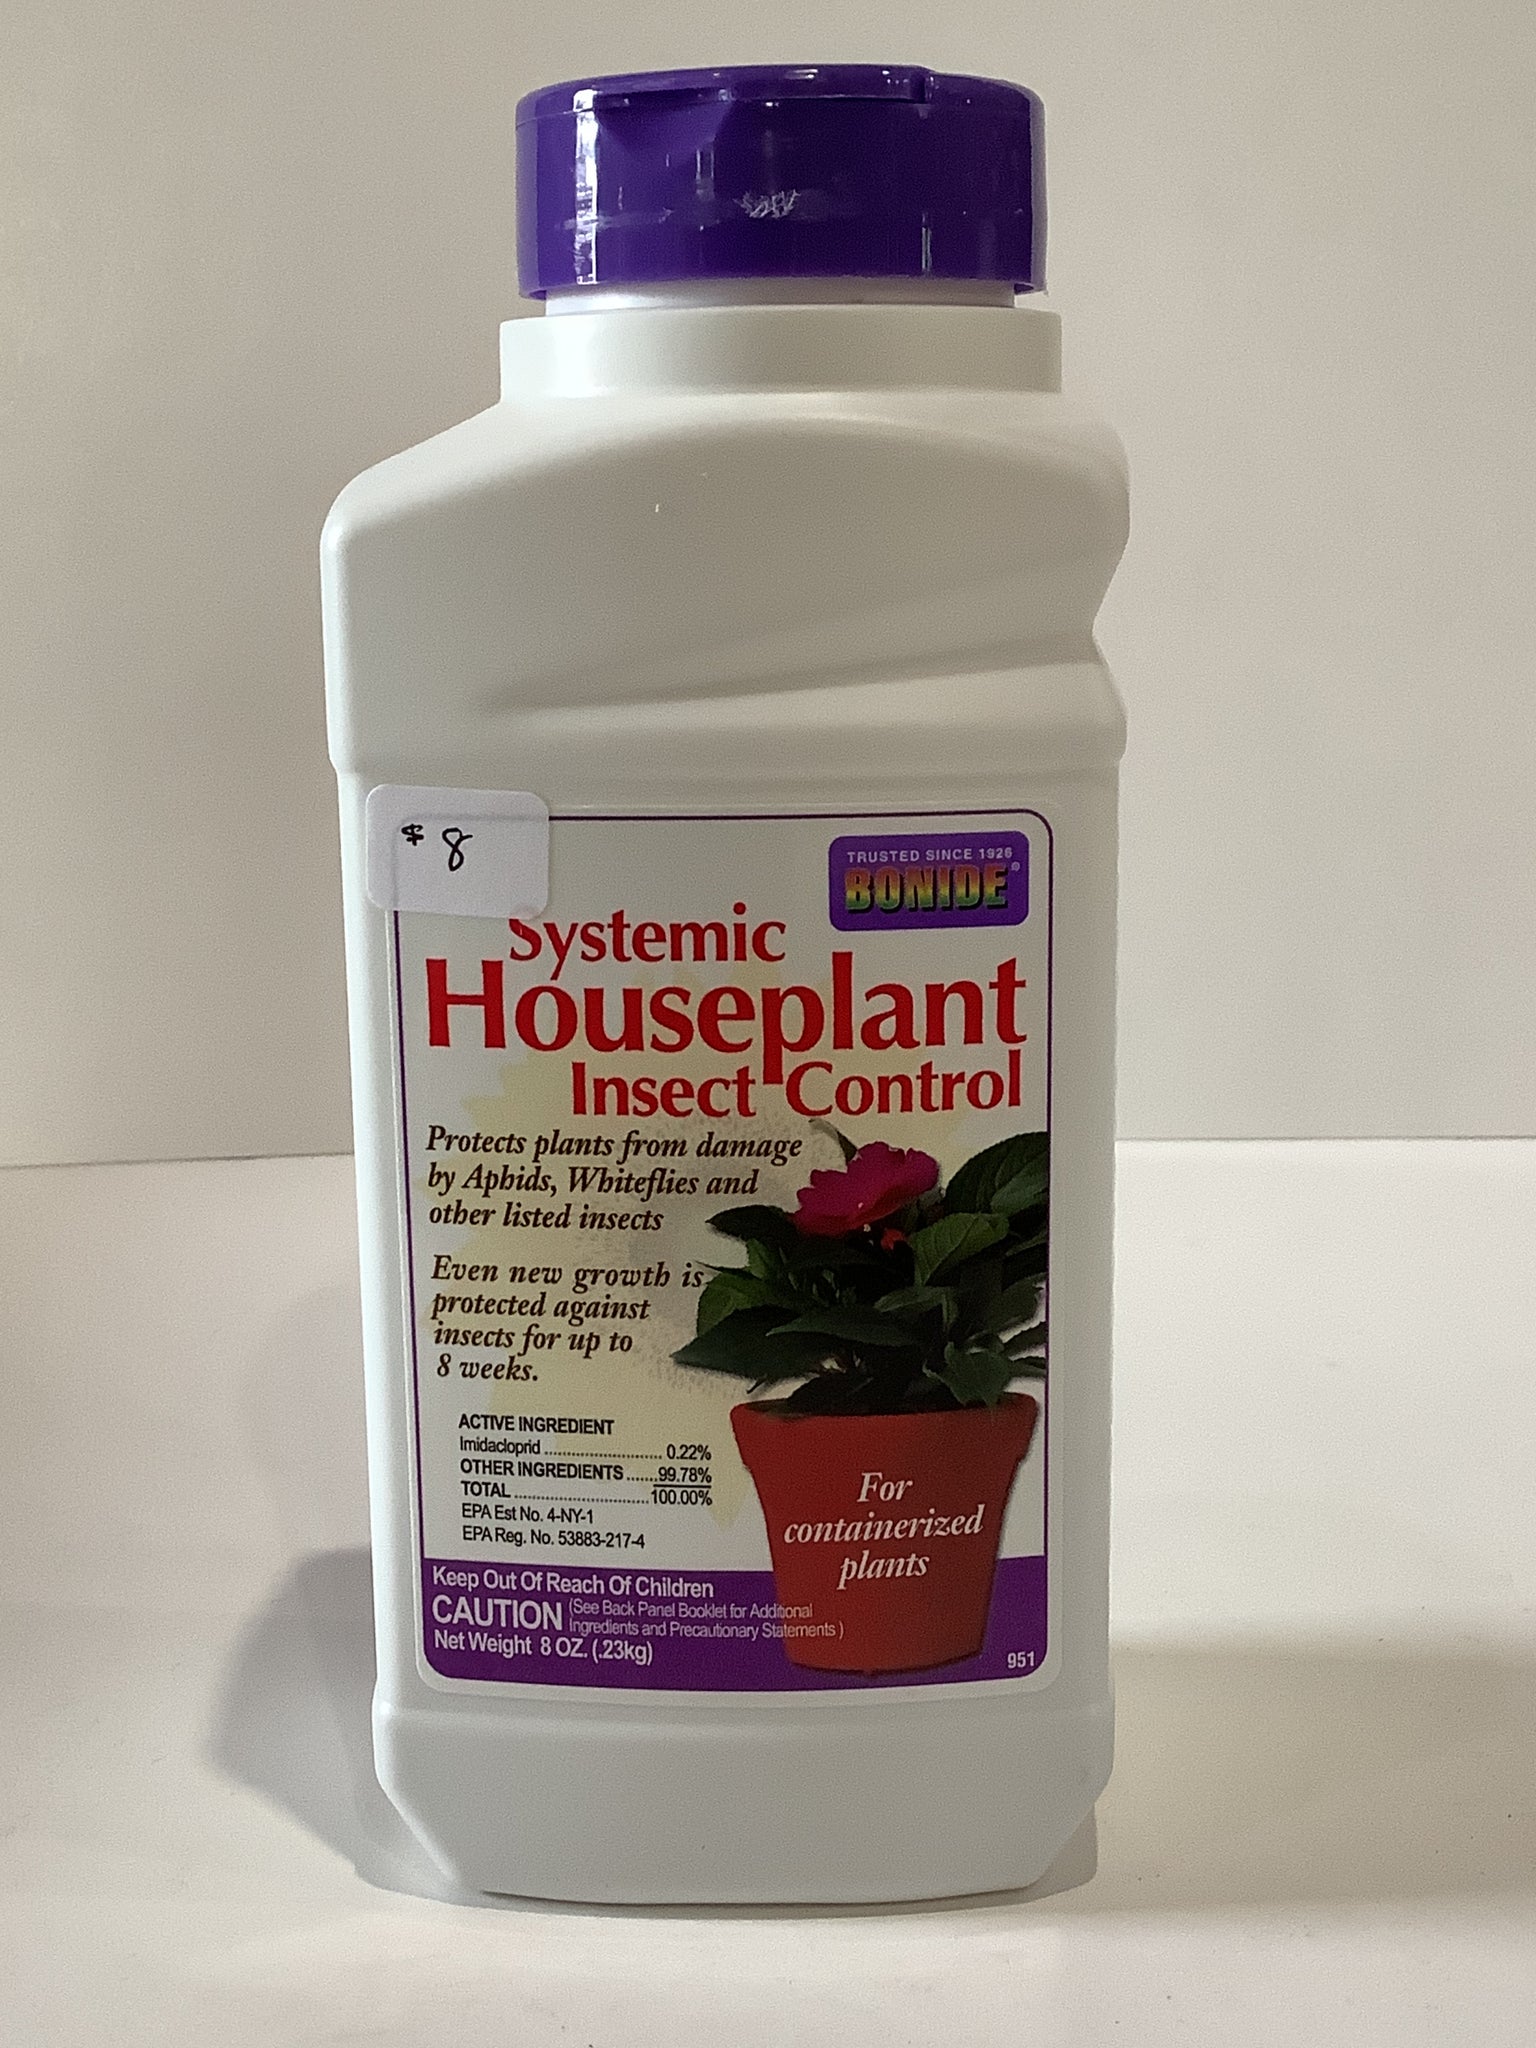 Systemic Houseplant insect control